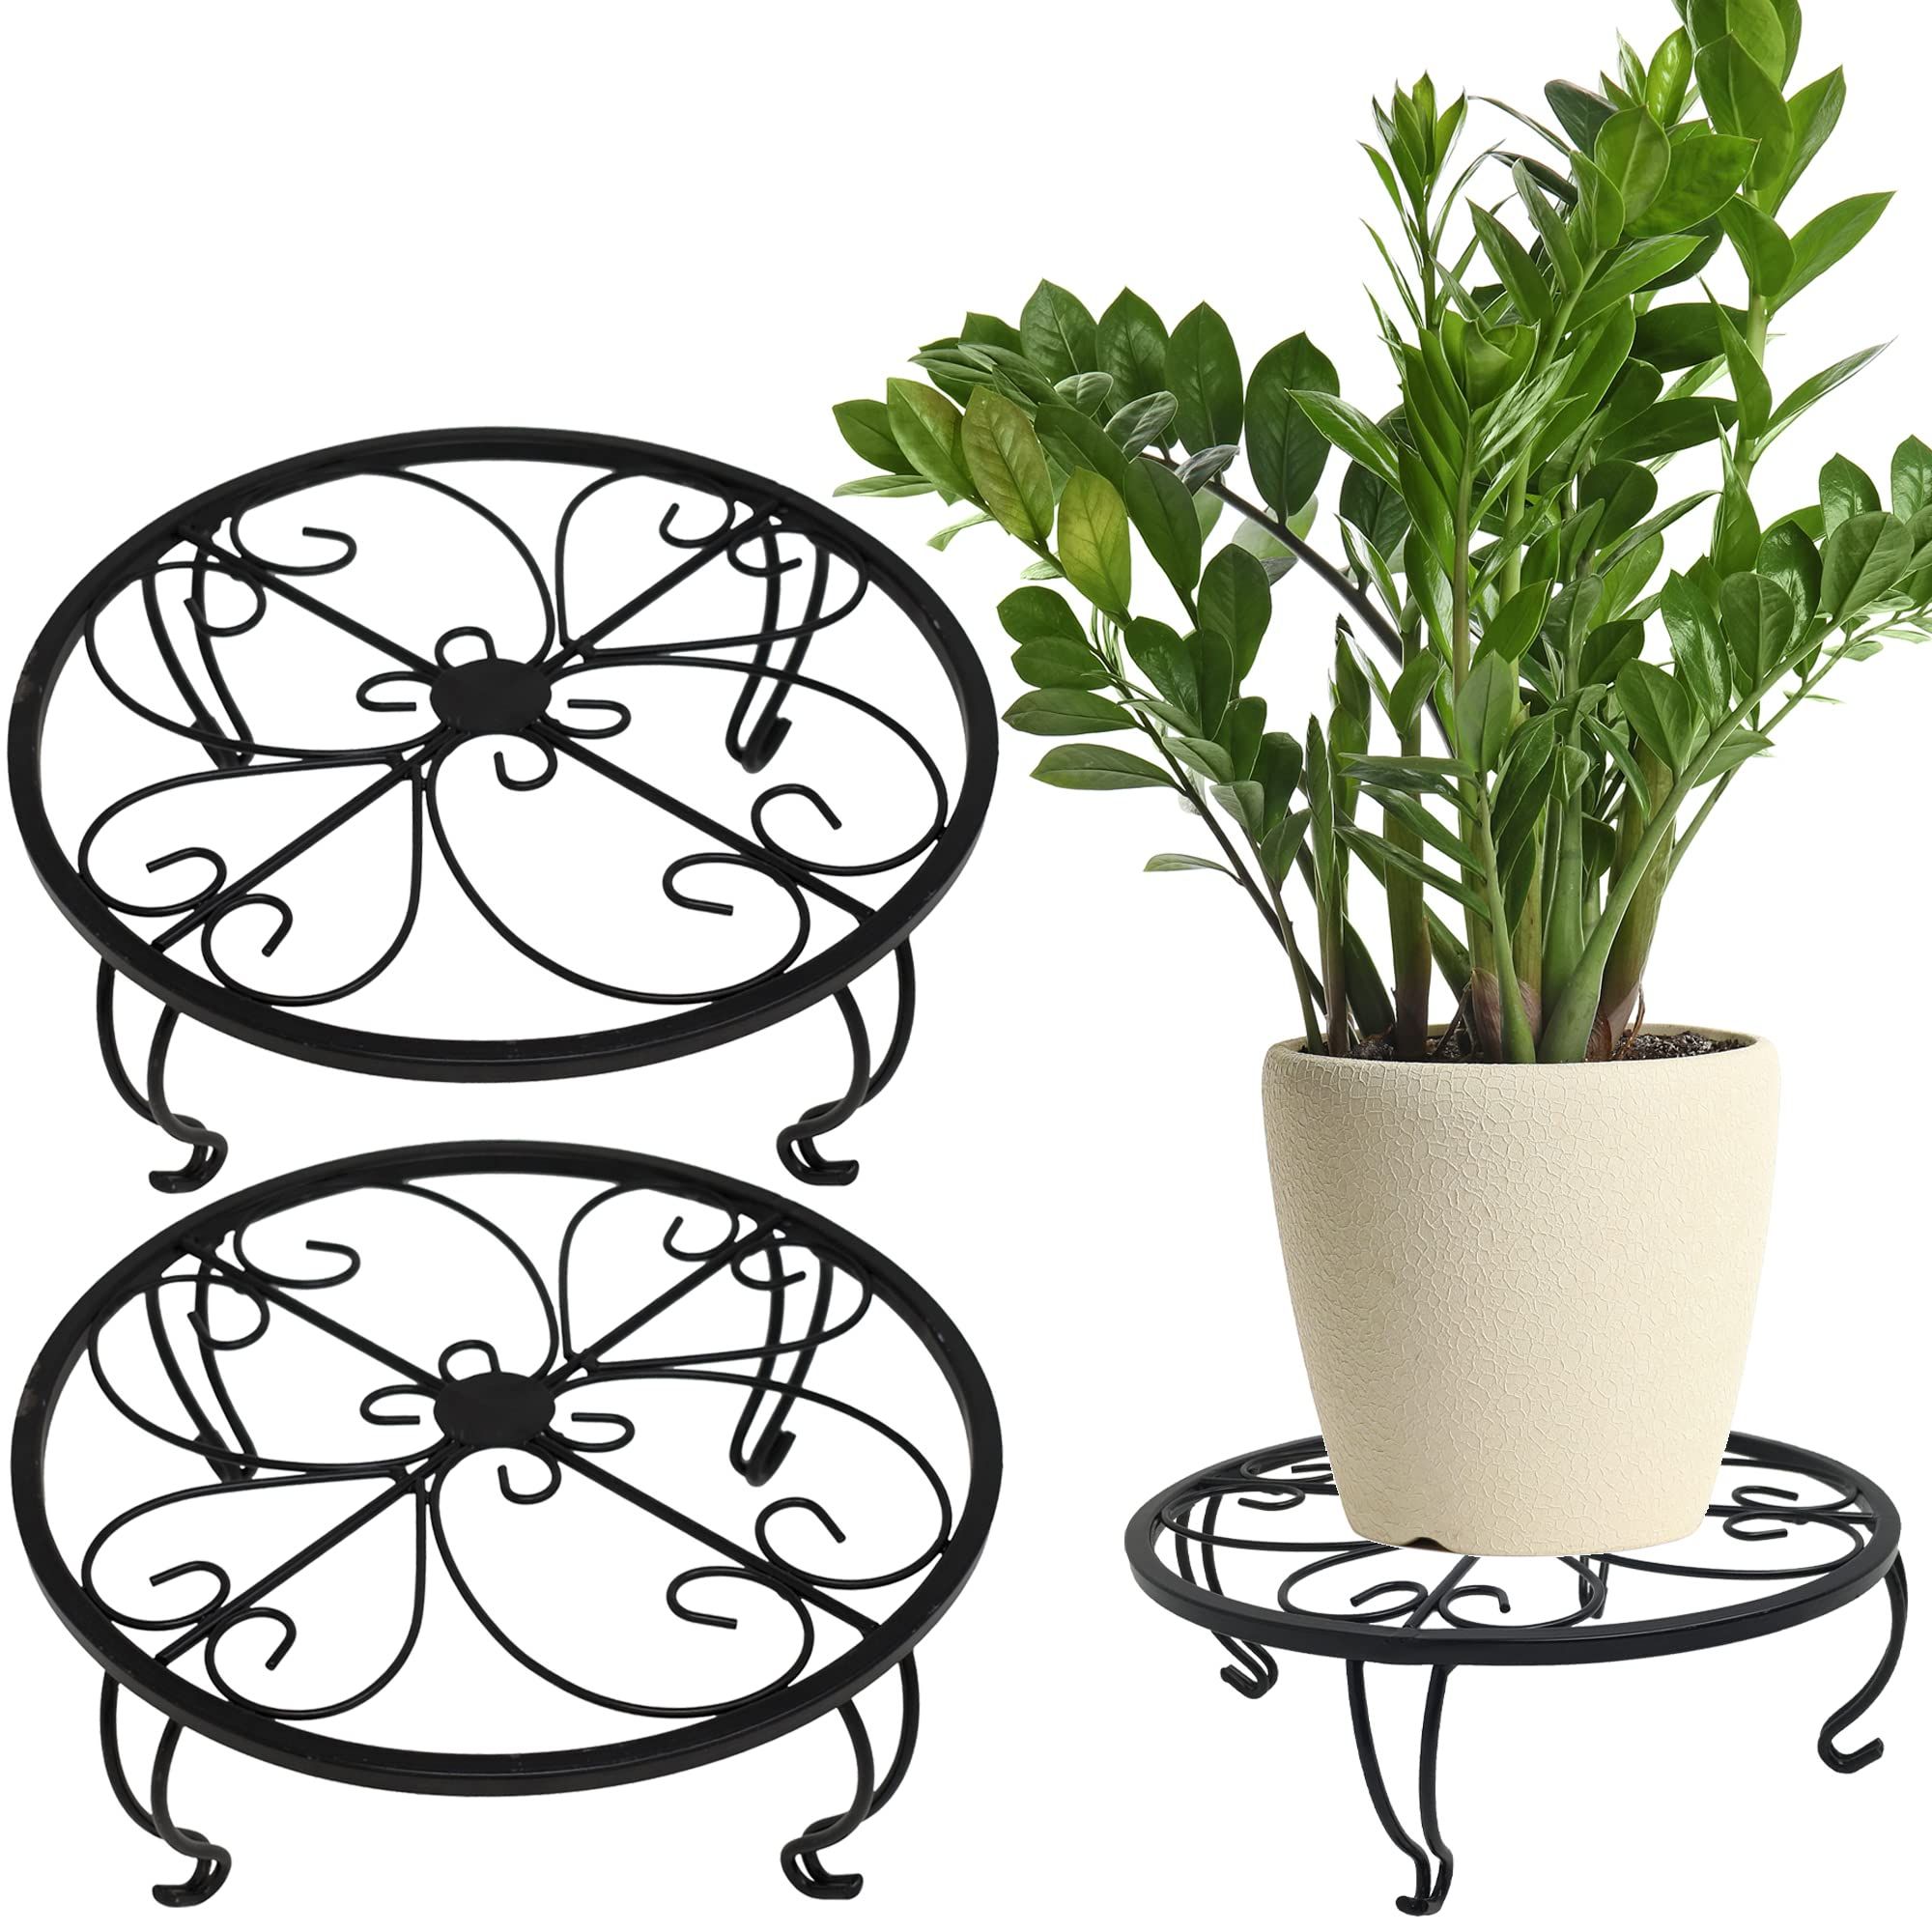 Powdercoat Plant Stands Pertaining To Most Up To Date 10” Metal Plant Stand (3 Pcs), Powder Coated Rust Resistant Metal,  Decorative Indoor Outdoor Flower Pot Holder Saucer, Round Heavy Garden  Planter Support Rack (View 5 of 10)